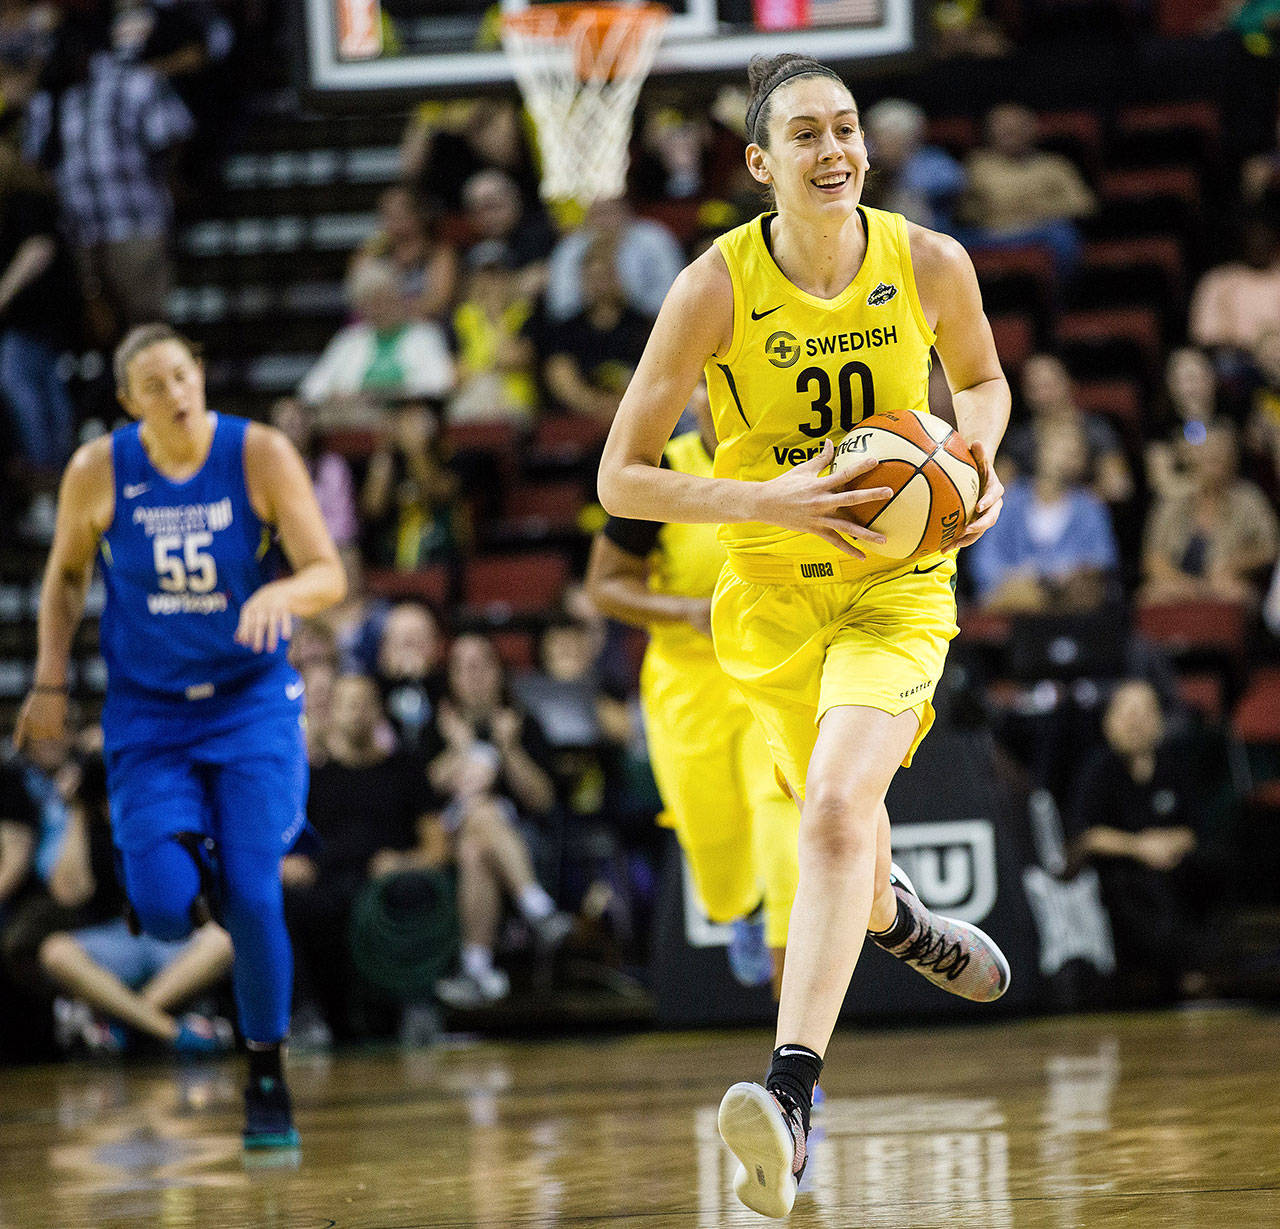 Seattle Storm’s Breanna Stewart smiles as she dribbles down the court after blocking a Dallas Wings shot on Sunday, Aug. 19, 2018 at Key Arena in Seattle, Wash. The Storm beat the Wings 84-68. (Rebekah Welch/Seattle Times/TNS)